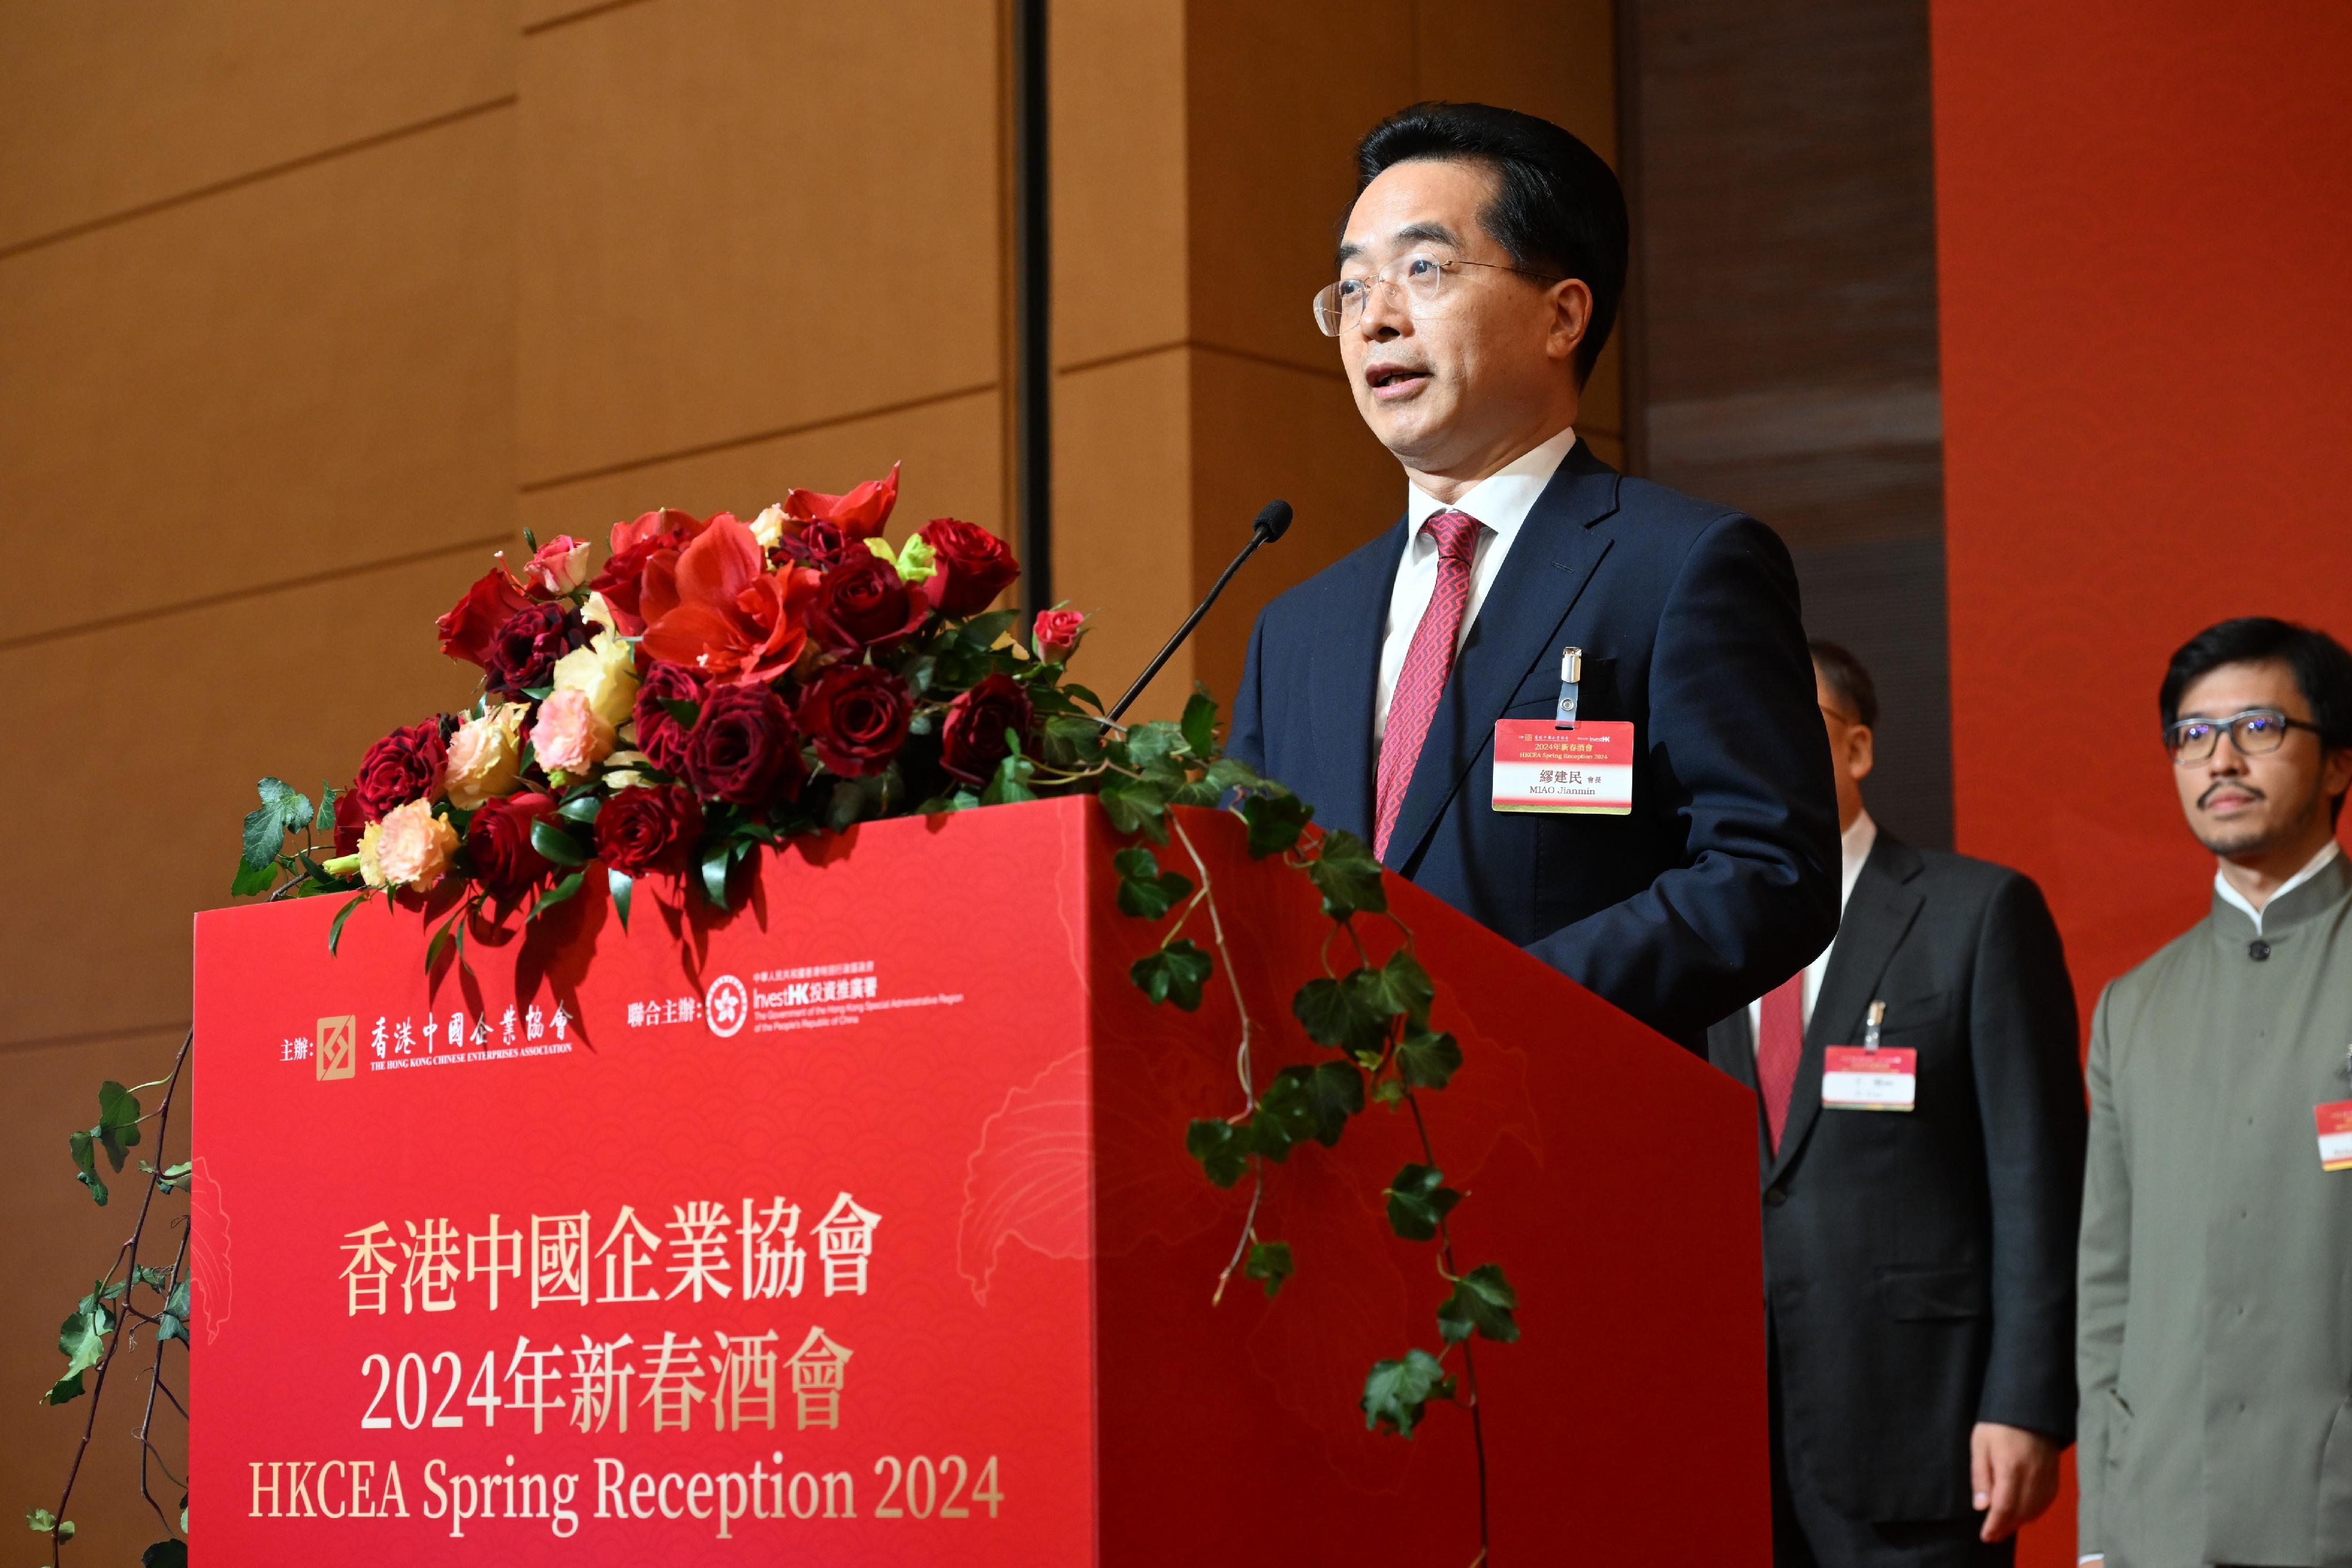 Invest Hong Kong (InvestHK) and the Hong Kong Chinese Enterprises Association (HKCEA) collaborated a spring reception this evening (February 26), receiving representatives from major Mainland enterprises in recognition of their lasting commitment and contributions to the city. Photo shows the Chairman of the HKCEA, Mr Miao Jianmin, addressing the guests at the reception.